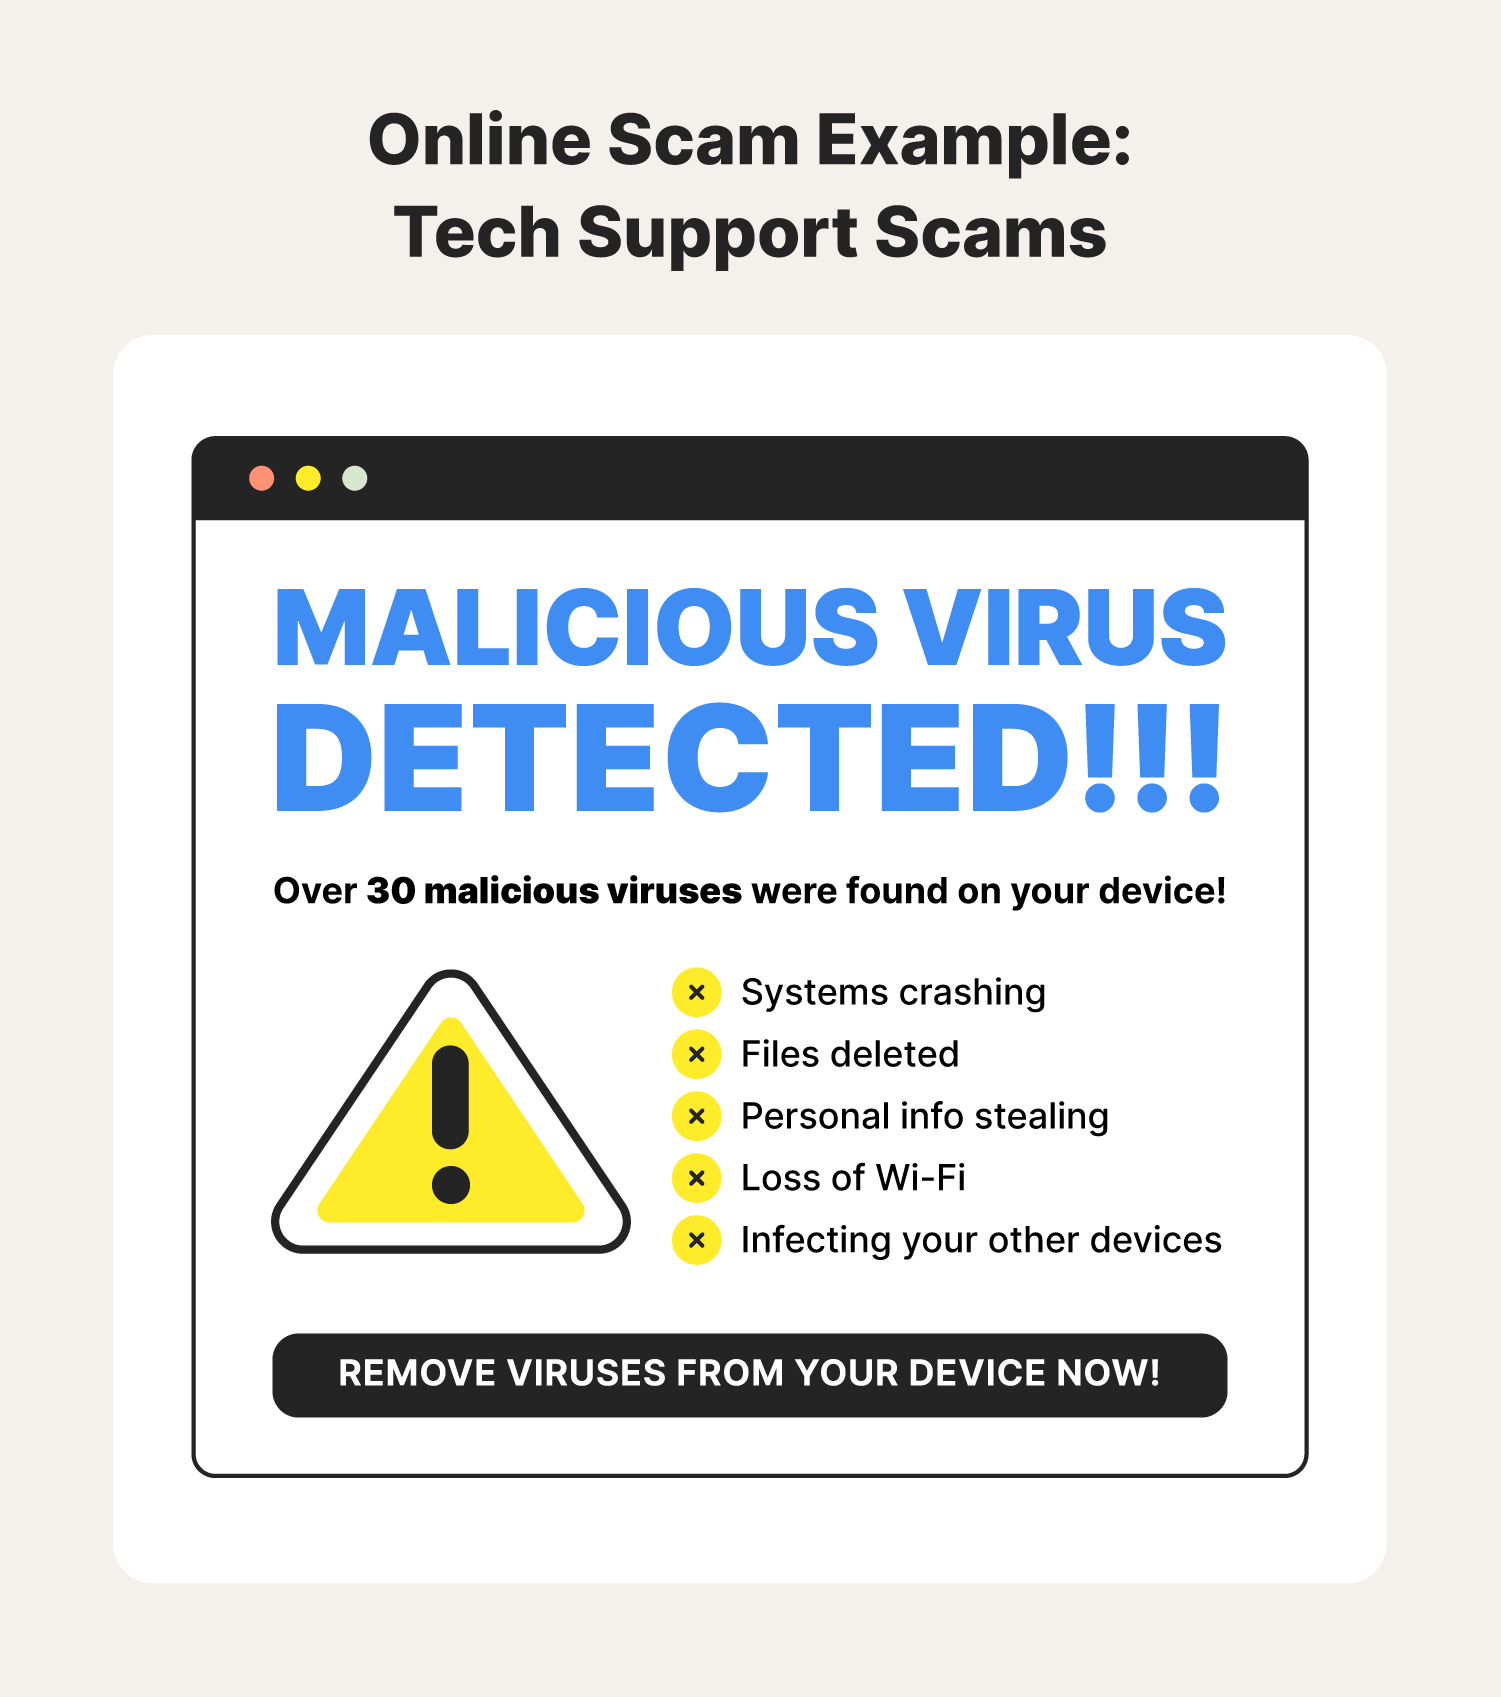 An example of a tech support scam helps depict what common online scams look like.